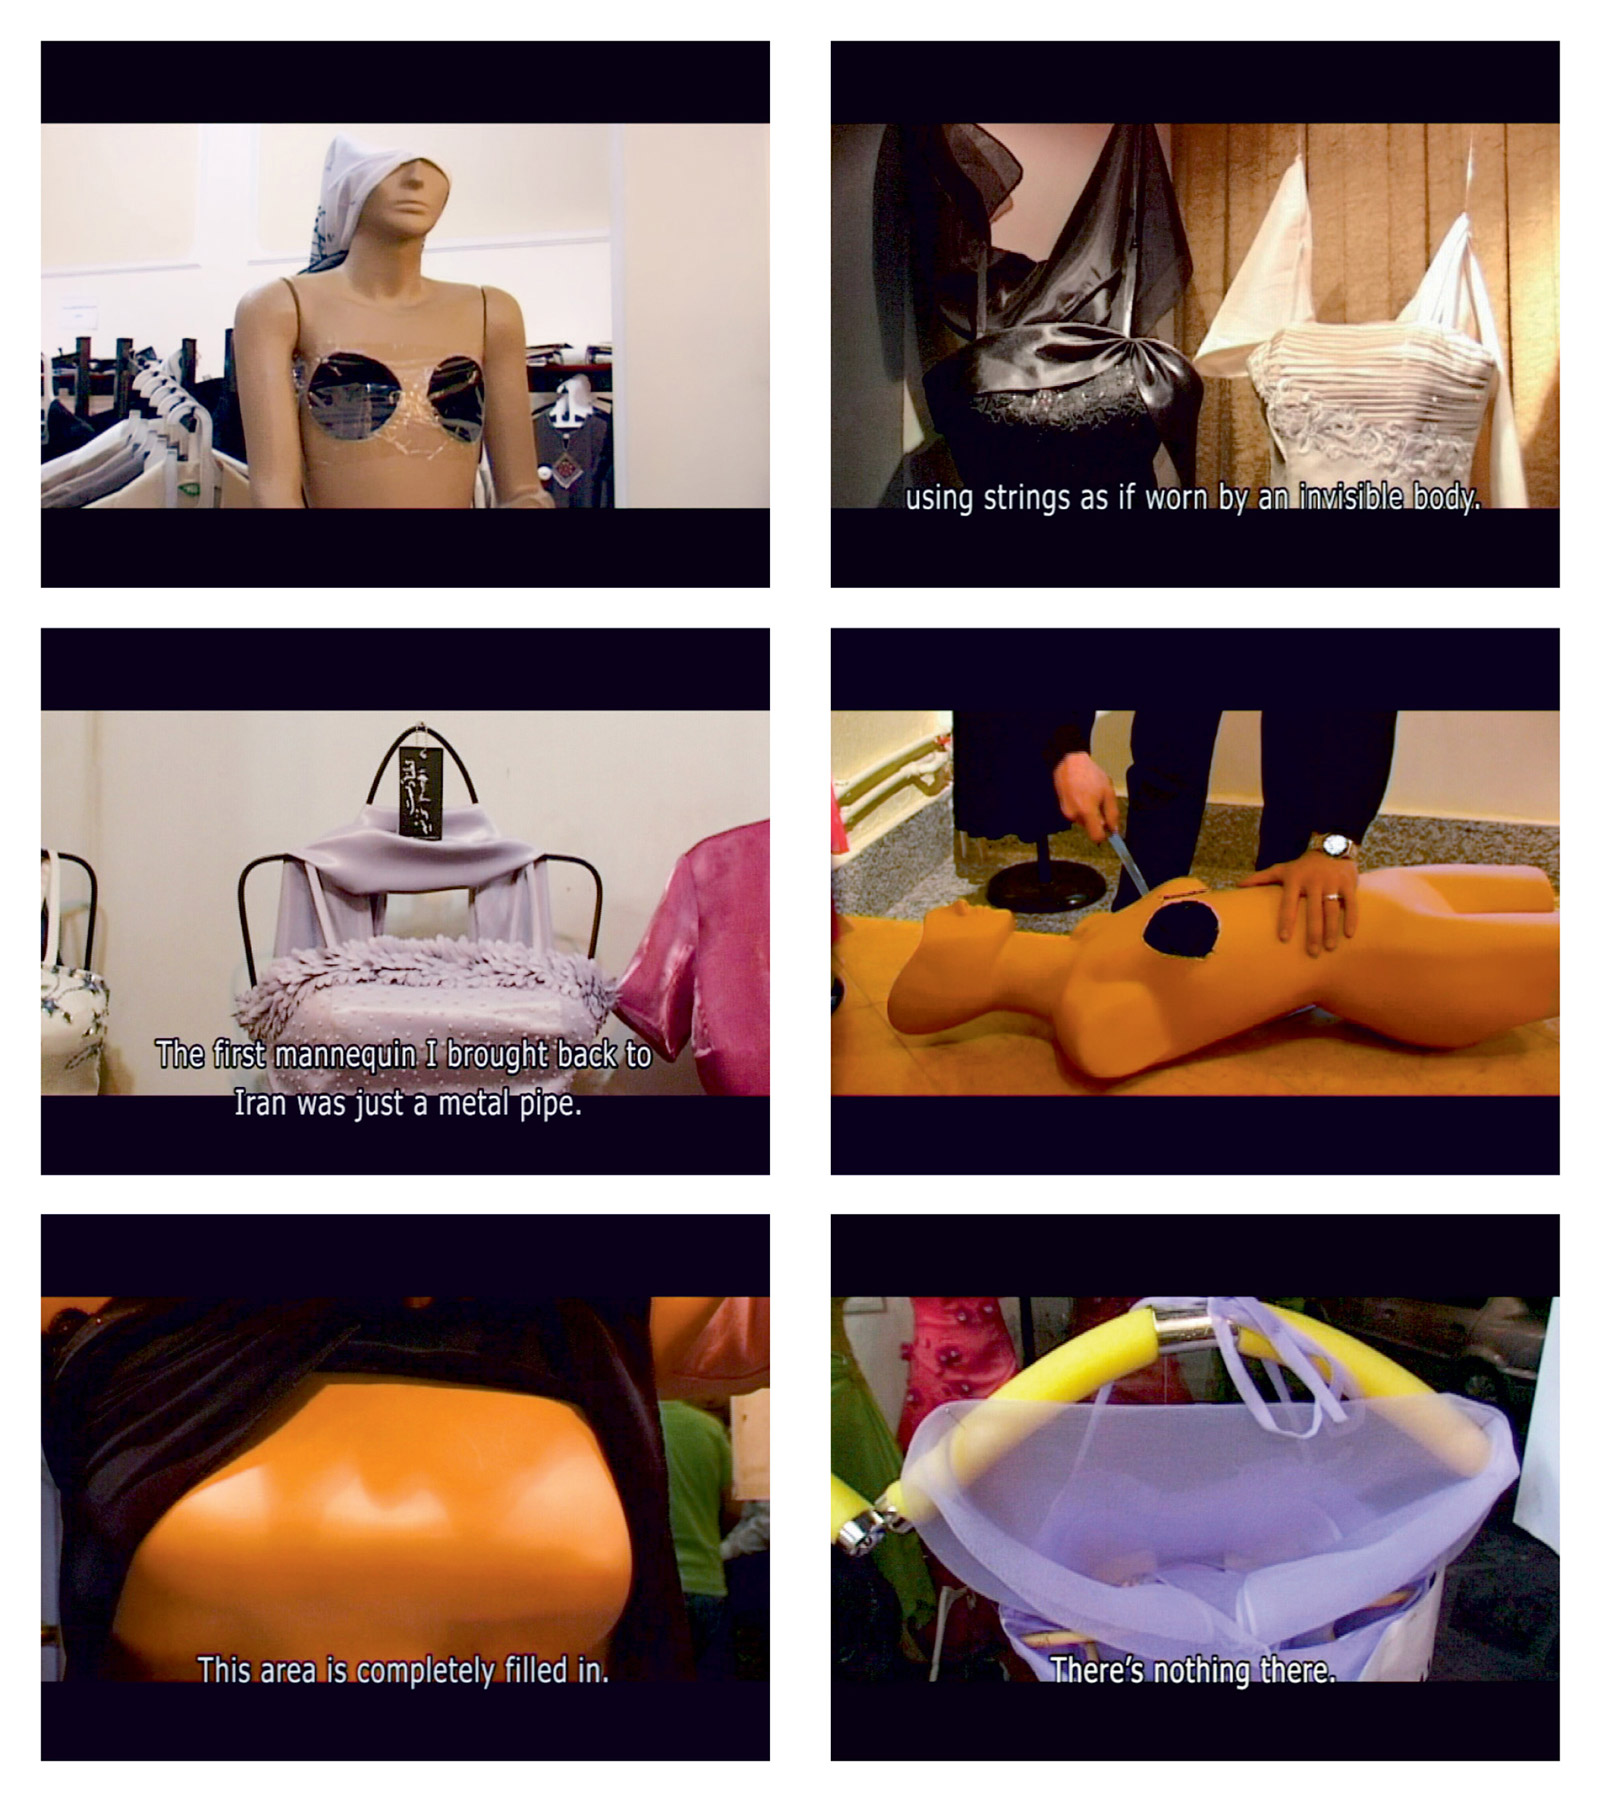 Six stills from Firouzeh Khosrovani’s two thousand and seven documentary “Rough Cut.” One depicts a mannequin with holes where the model breasts should be. The second depicts two dresses hanging from wire in a shop window, as if worn by an invisible body. The third depicts a wire rack used as a mannequin. The fourth depicts a mannequin having its model breasts cut away with a knife by someone who is standing over it. The fifth depicts a mannequin where the model breasts have been filled in to create a ledge. The final image depicts a dress hanging from a normal coat hanger with no suggested body.